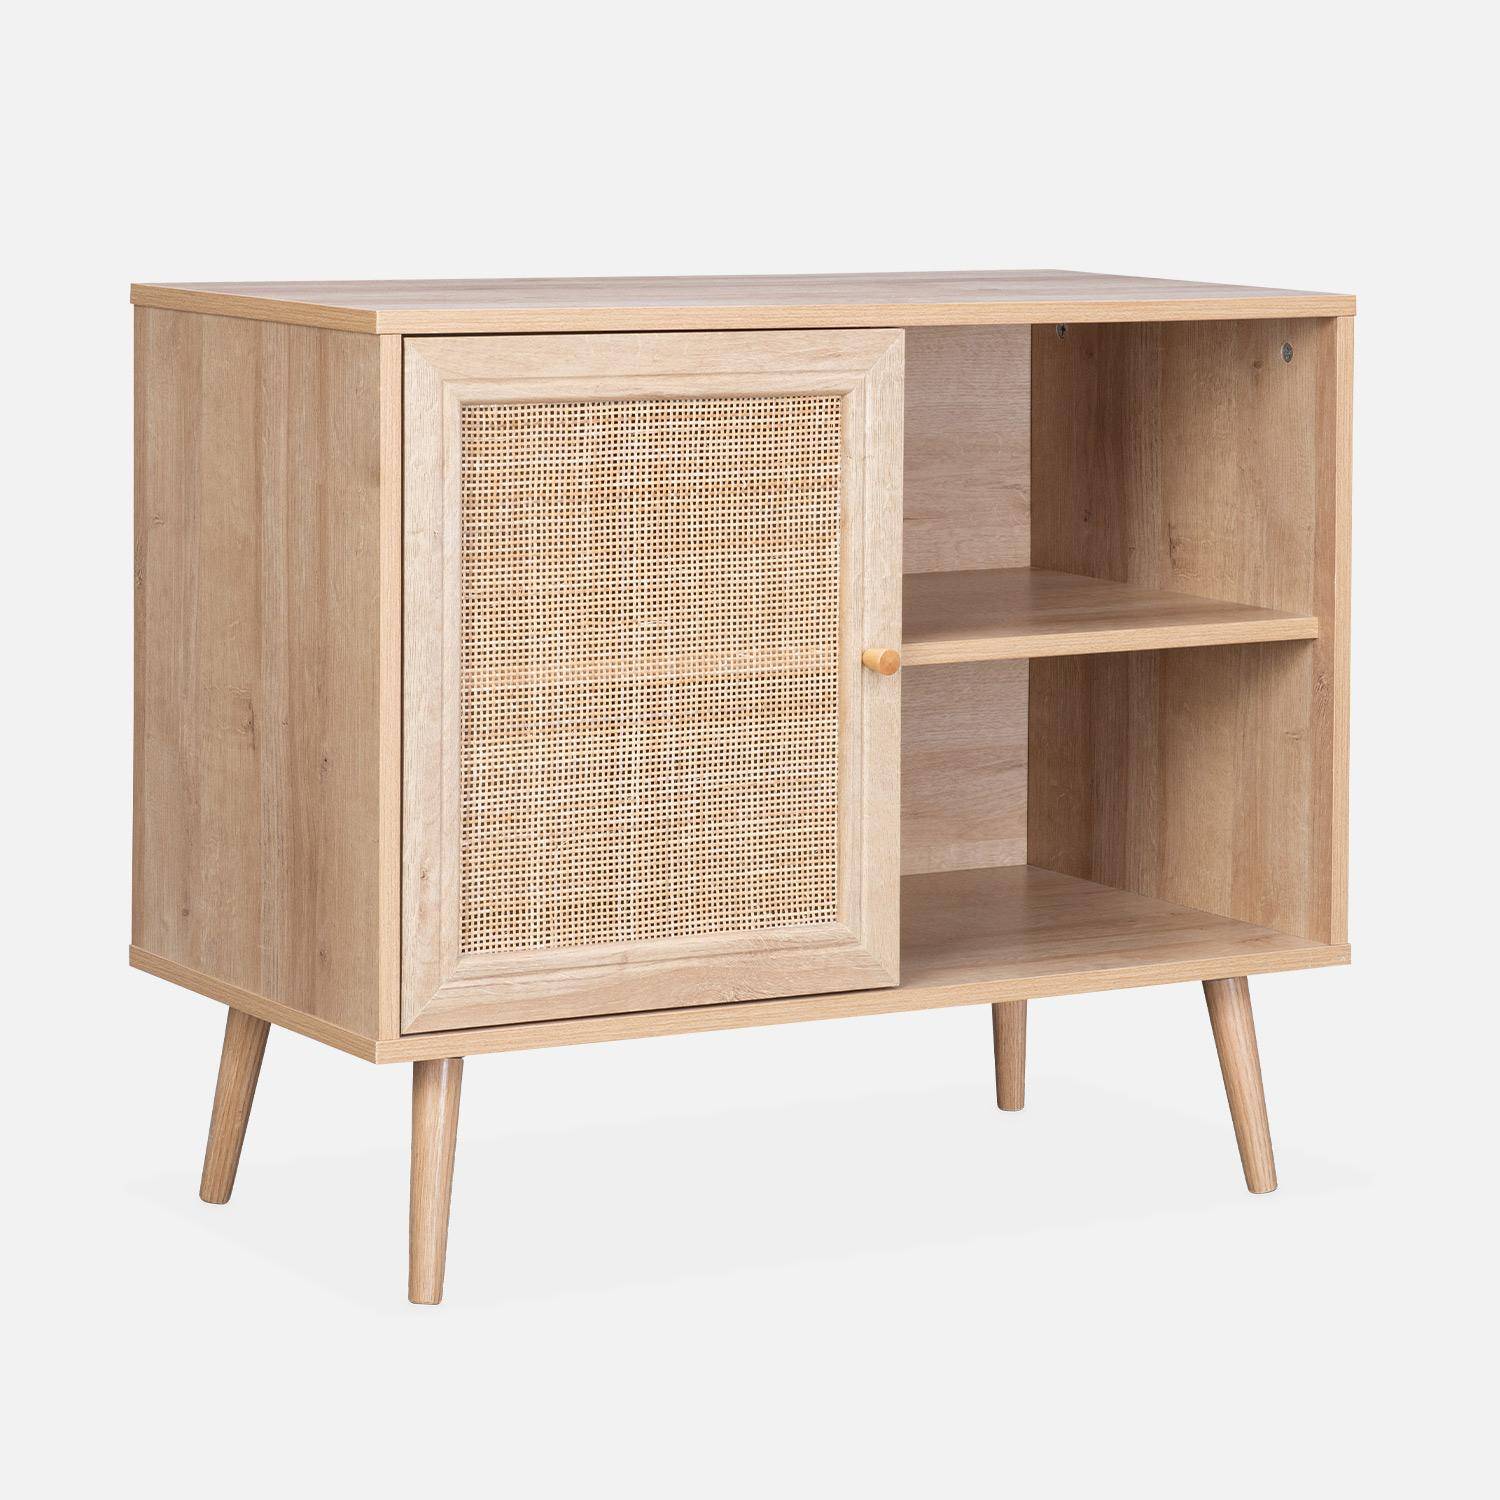 Wooden and cane rattan detail storage cabinet with 2 shelves, 1 cupboard, Scandi-style legs, 80x39x65.8cm - Boheme - Natural wood colour,sweeek,Photo3